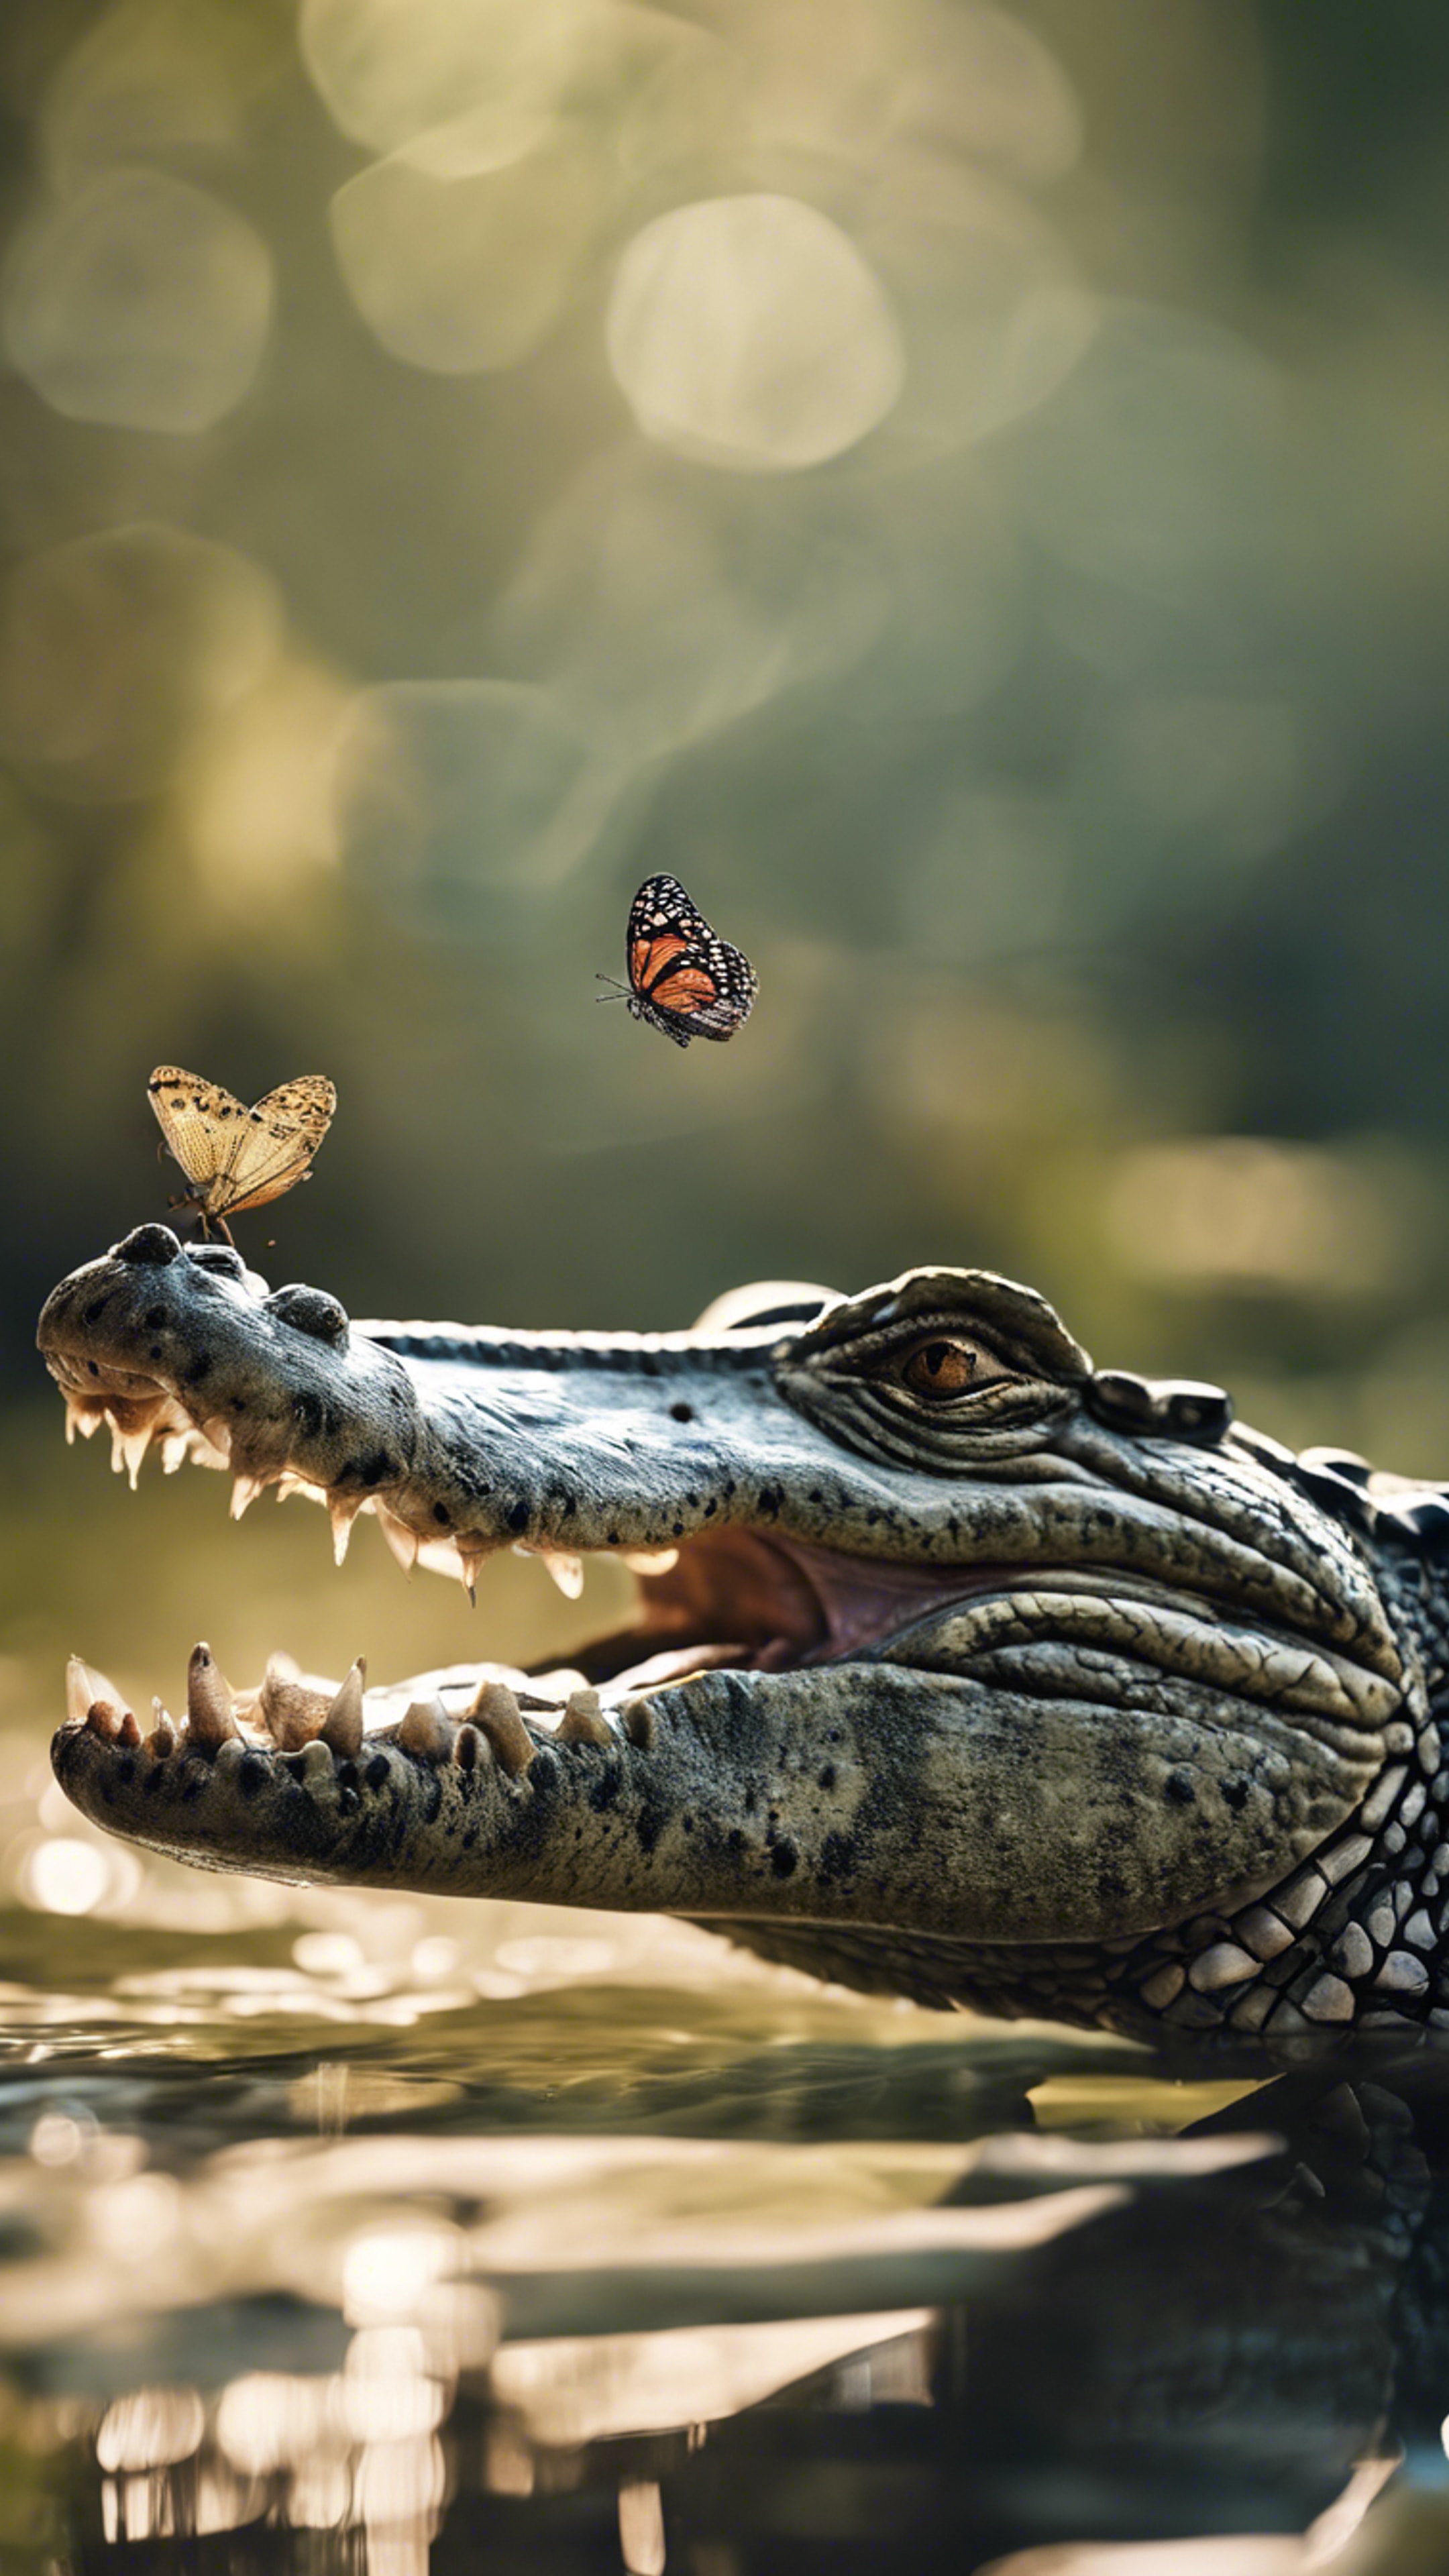 Crocodile resting with a butterfly perched on its snout in a surreal juxtaposition. Wallpaper[8346a78328a54efca4ea]